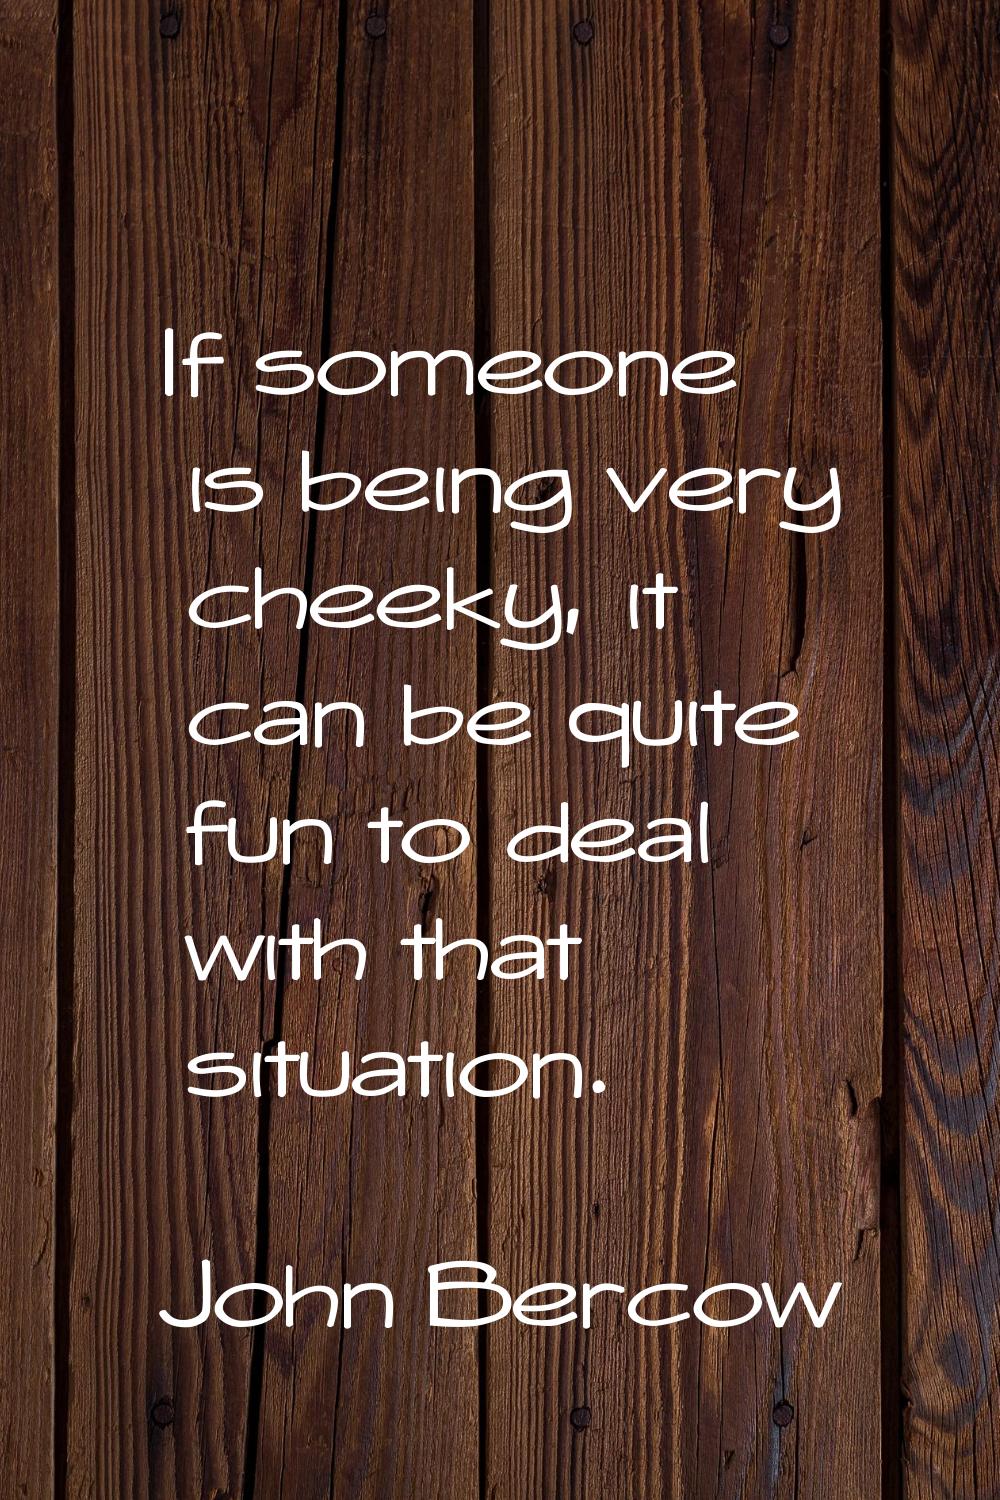 If someone is being very cheeky, it can be quite fun to deal with that situation.